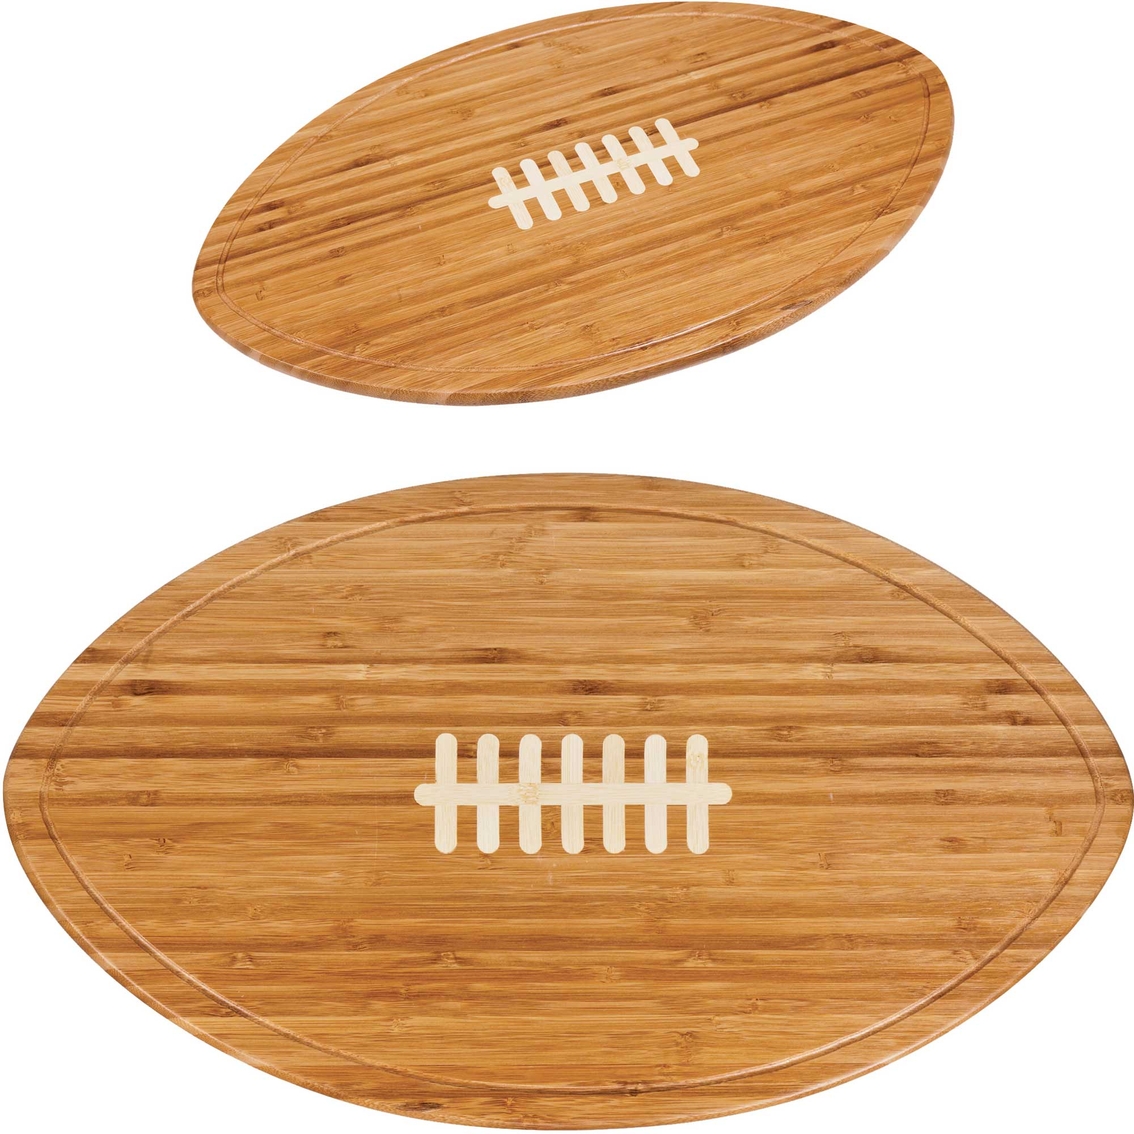 Picnic Time Kickoff Football Cutting Board and Serving Tray - Image 3 of 10